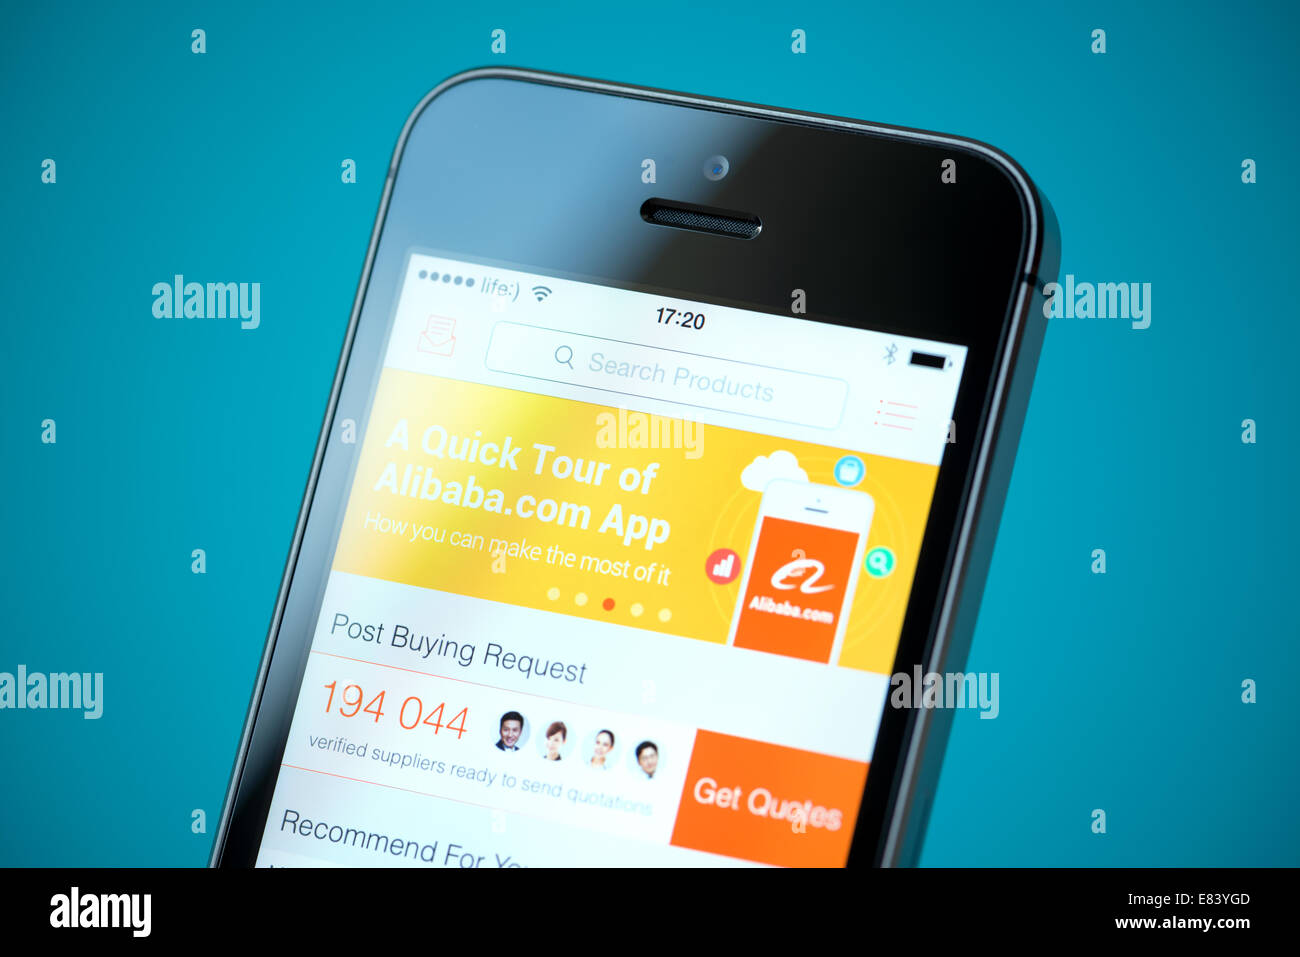 Close-up shot of brand new Apple iPhone 5S with Alibaba online store application on a screen. Stock Photo